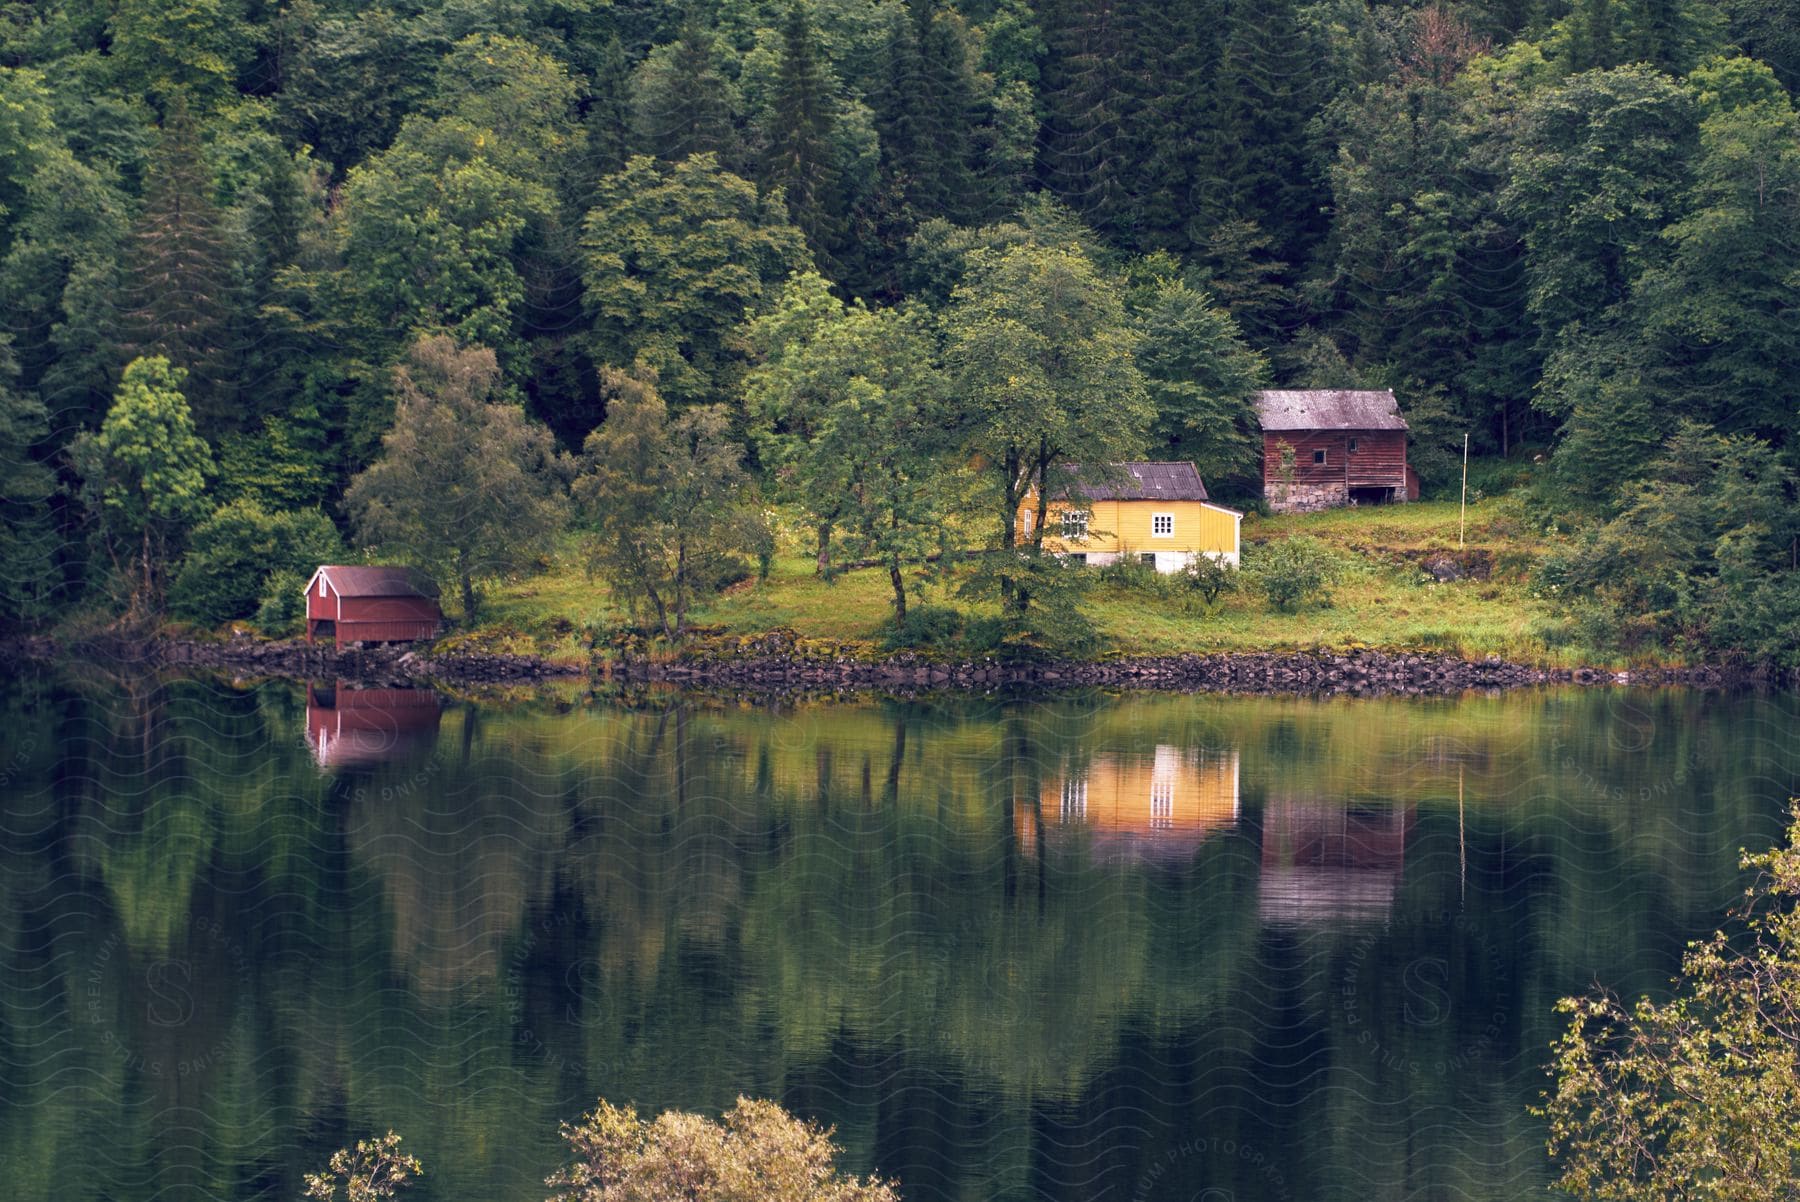 A serene landscape with a tranquil lake surrounded by green forests and a few buildings at the water's edge. The reflection of the trees and buildings in the calm lake water creates a mirror effect.